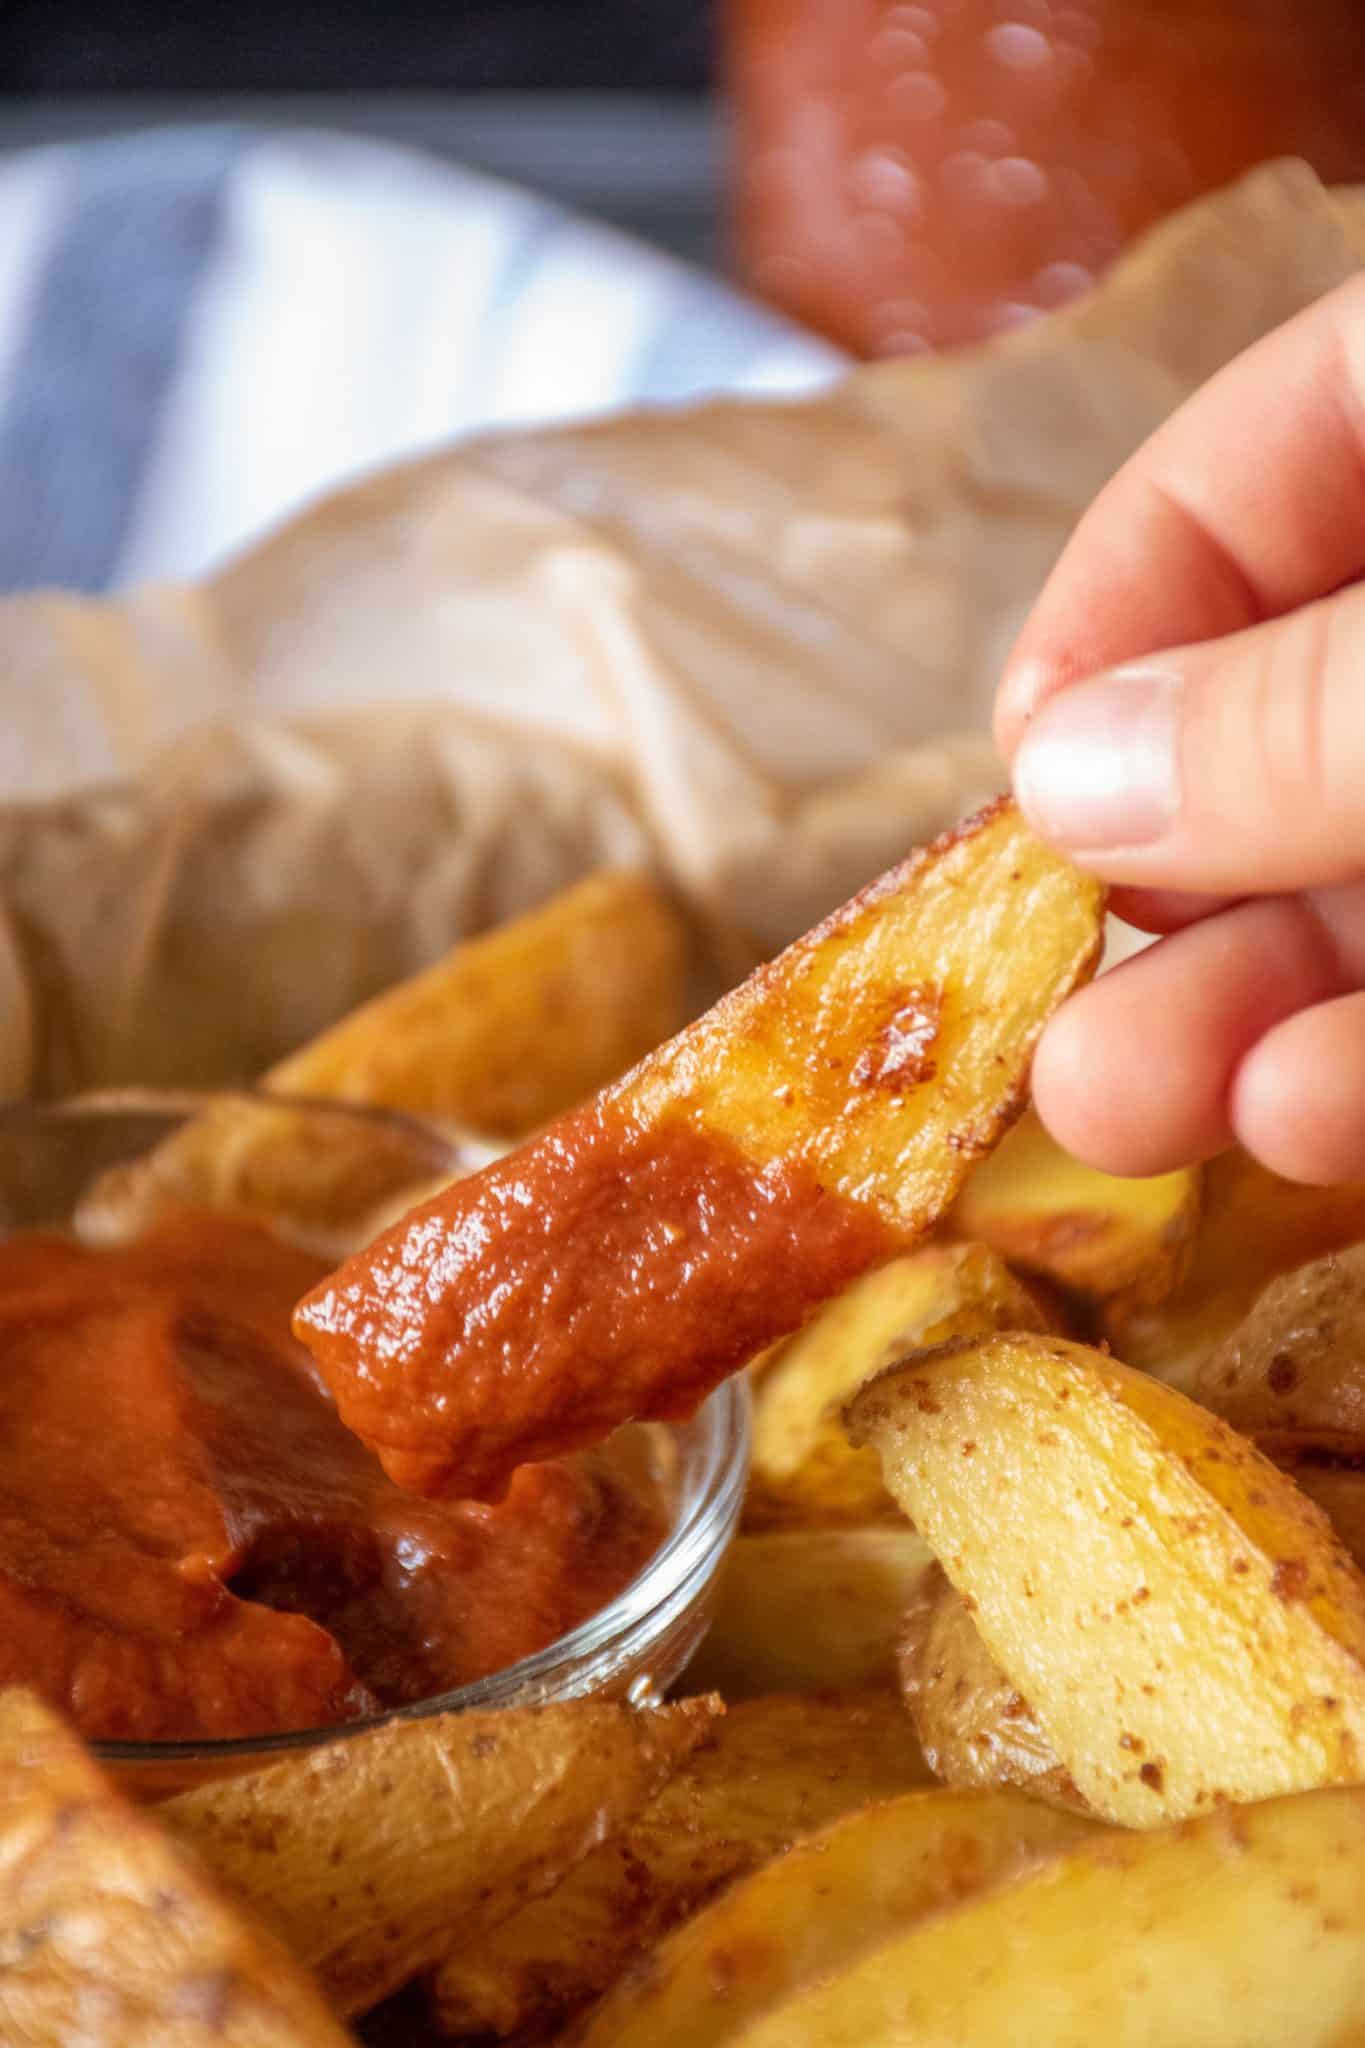 Hand holding a potato wedge, dipped in ketchup.